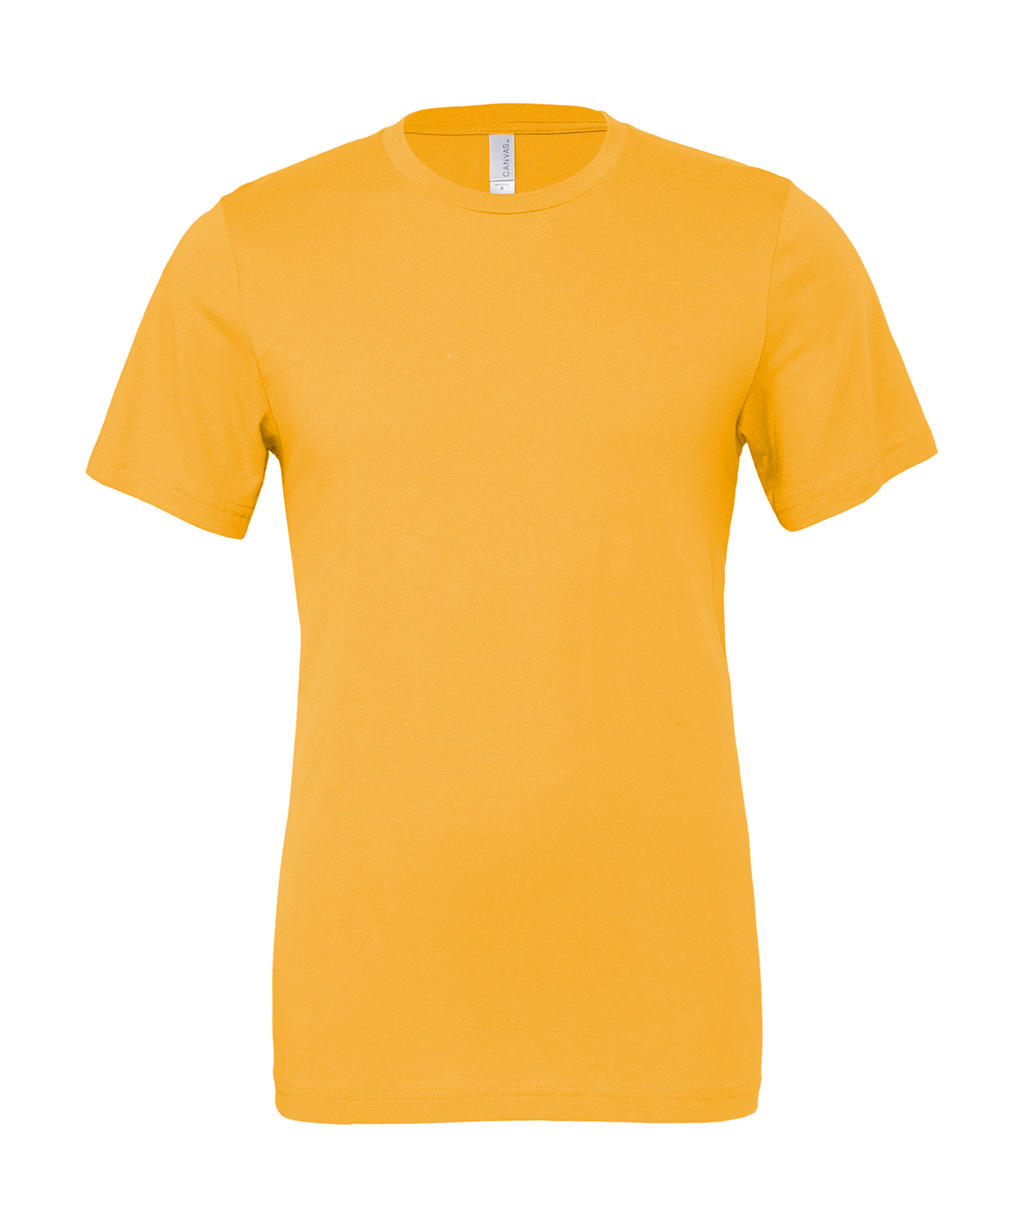  Unisex Jersey Short Sleeve Tee in Farbe Gold